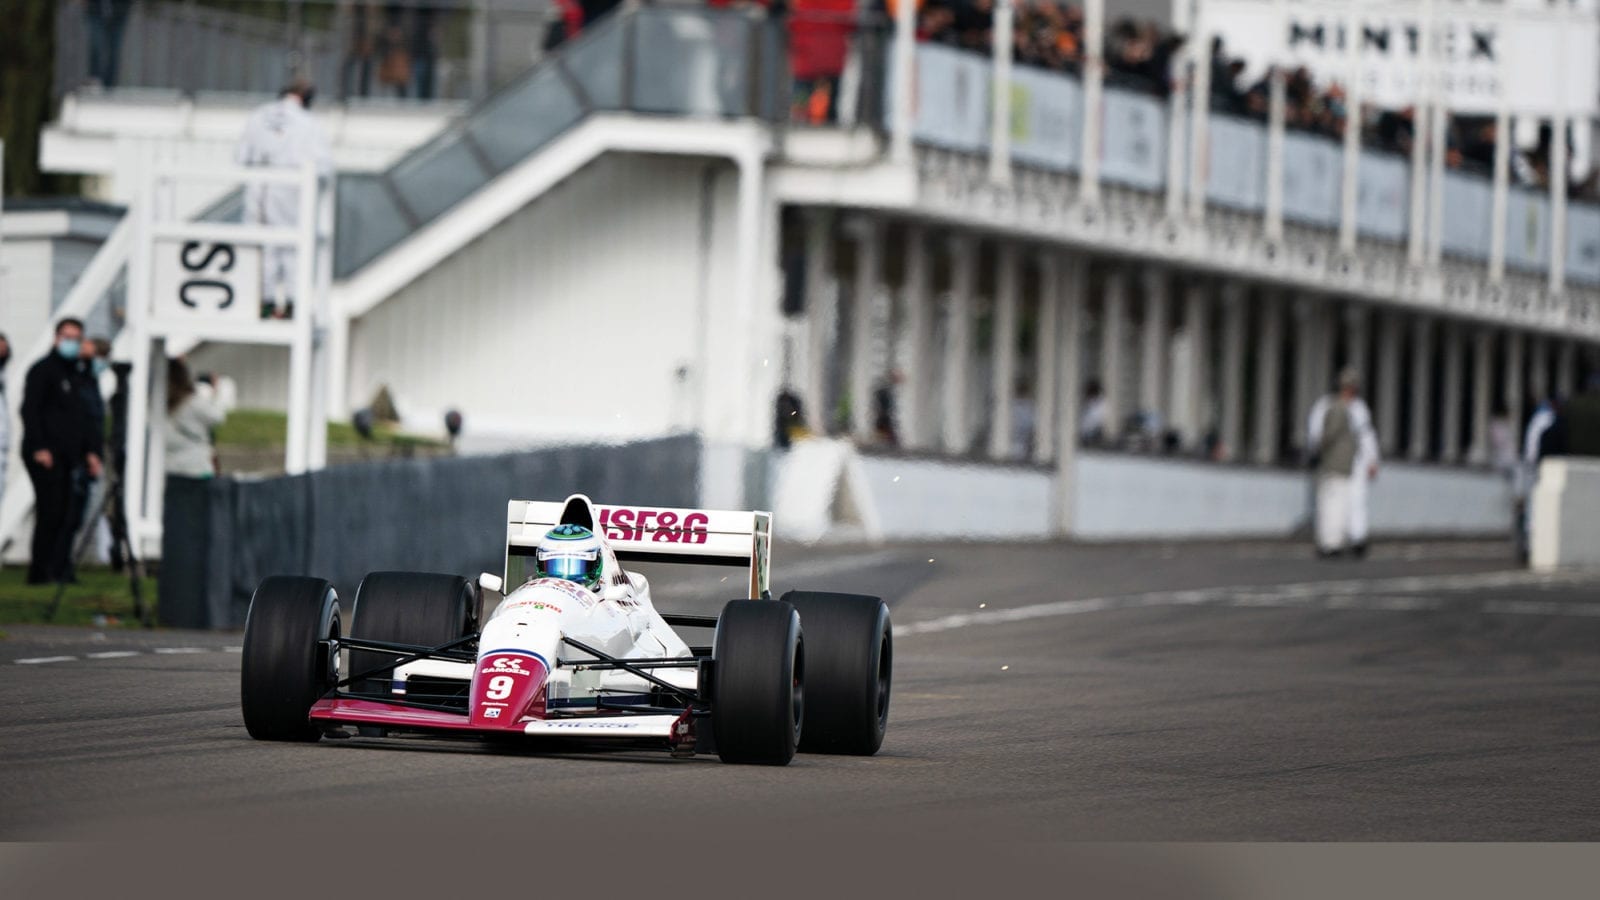 Nick Padmore at the 2020 Goodwood SpeedWeek in the Arrows F1 car he used to set the circuit lap record